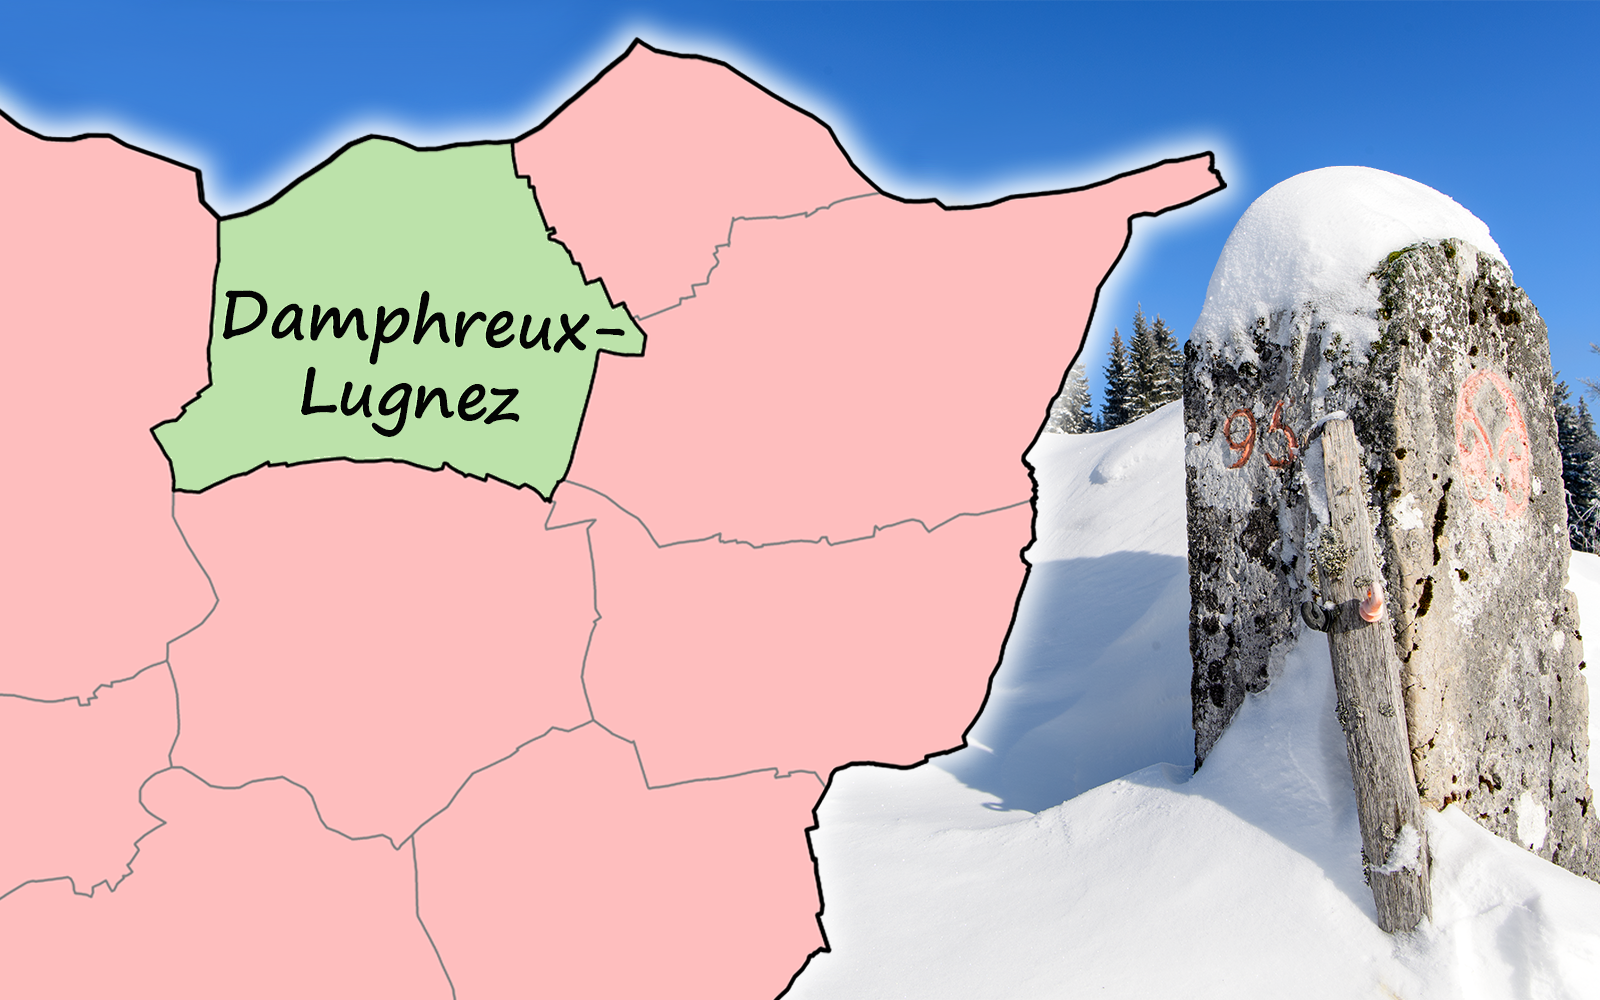 The picture shows a boundary stone in a snow-covered landscape on the right. On the left, the municipal boundaries in the northern part of the canton of Jura, in the French border region, with the municipality name 'Damphreux-Lugnez'. 